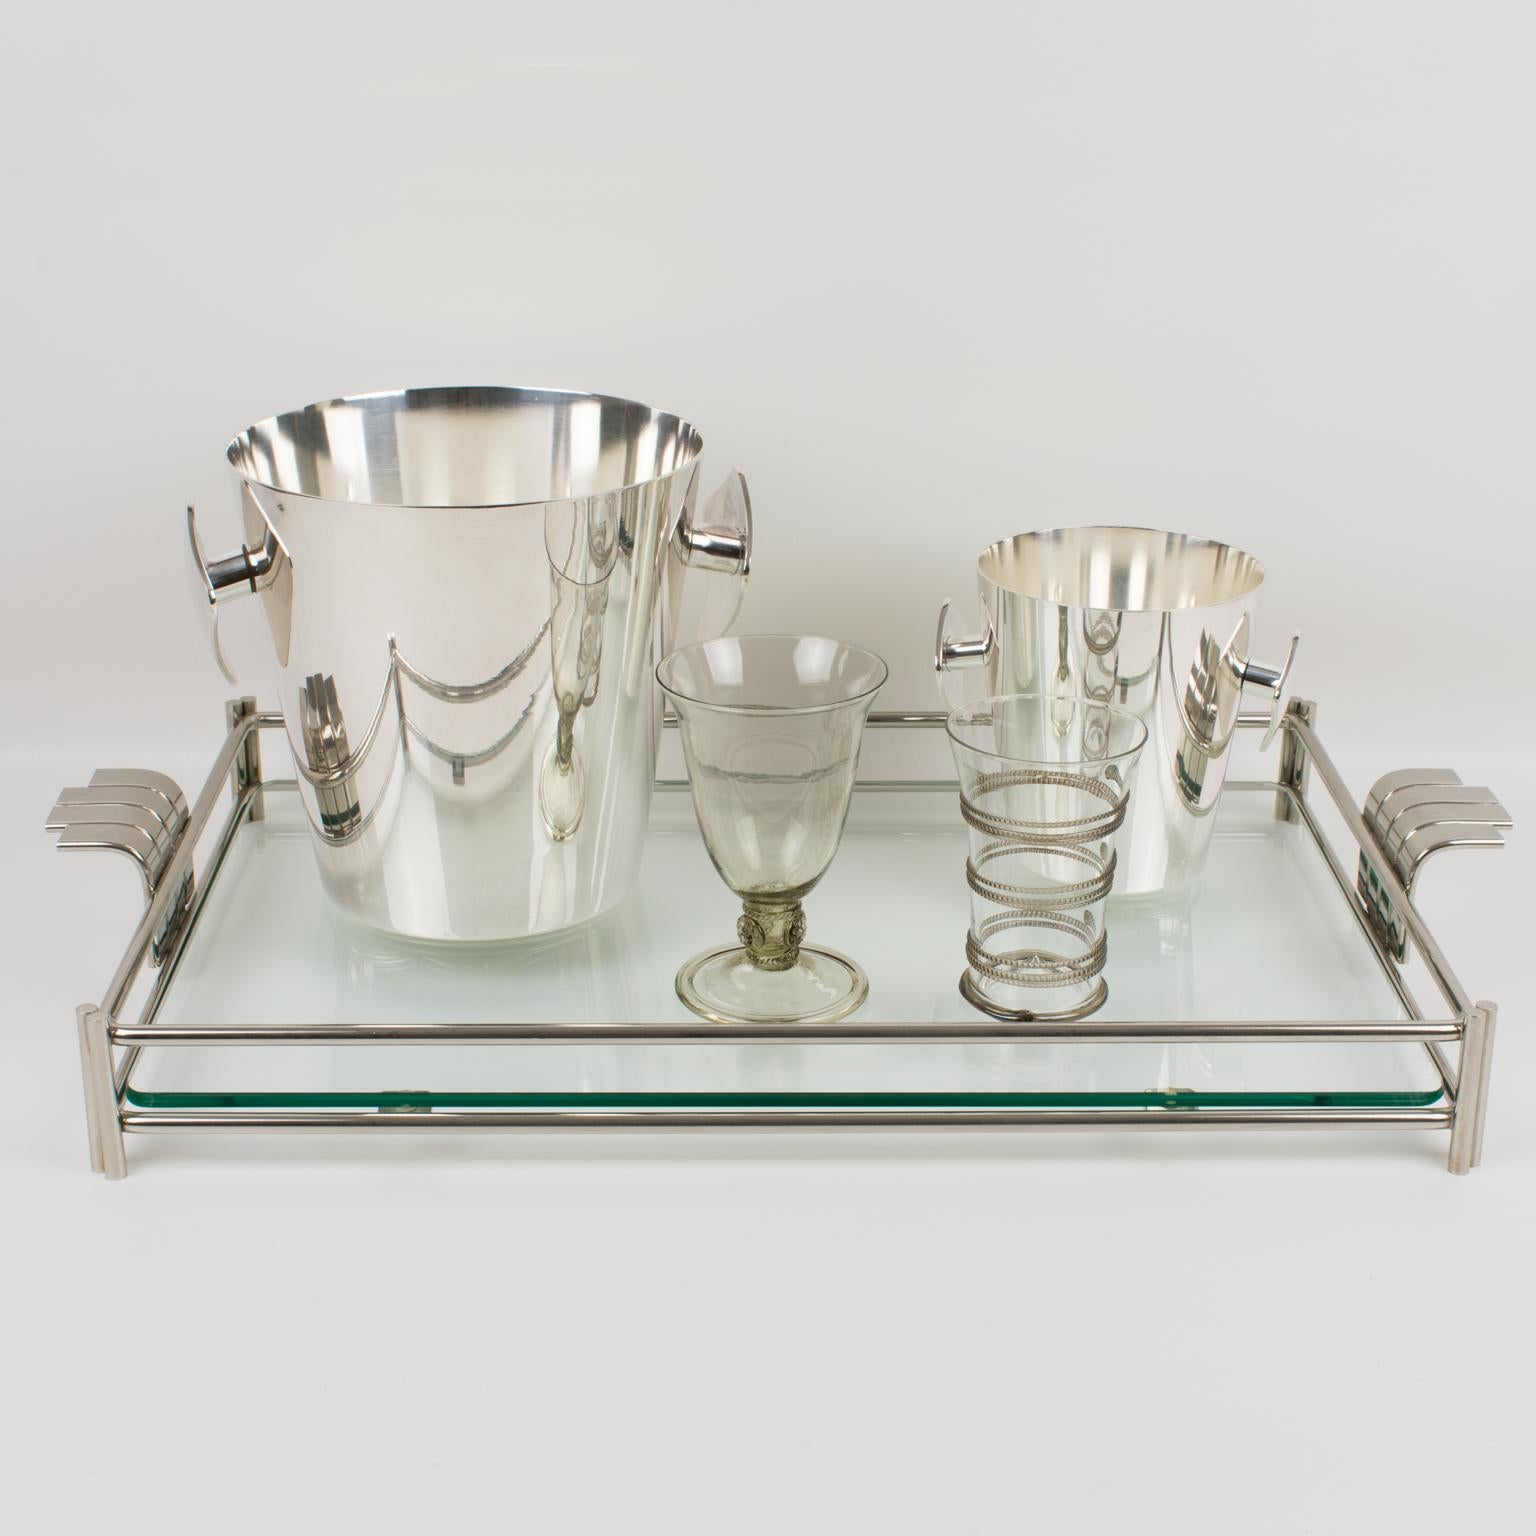 Late 20th Century Christian Dior Home Barware Silver Plate and Glass Serving Tray